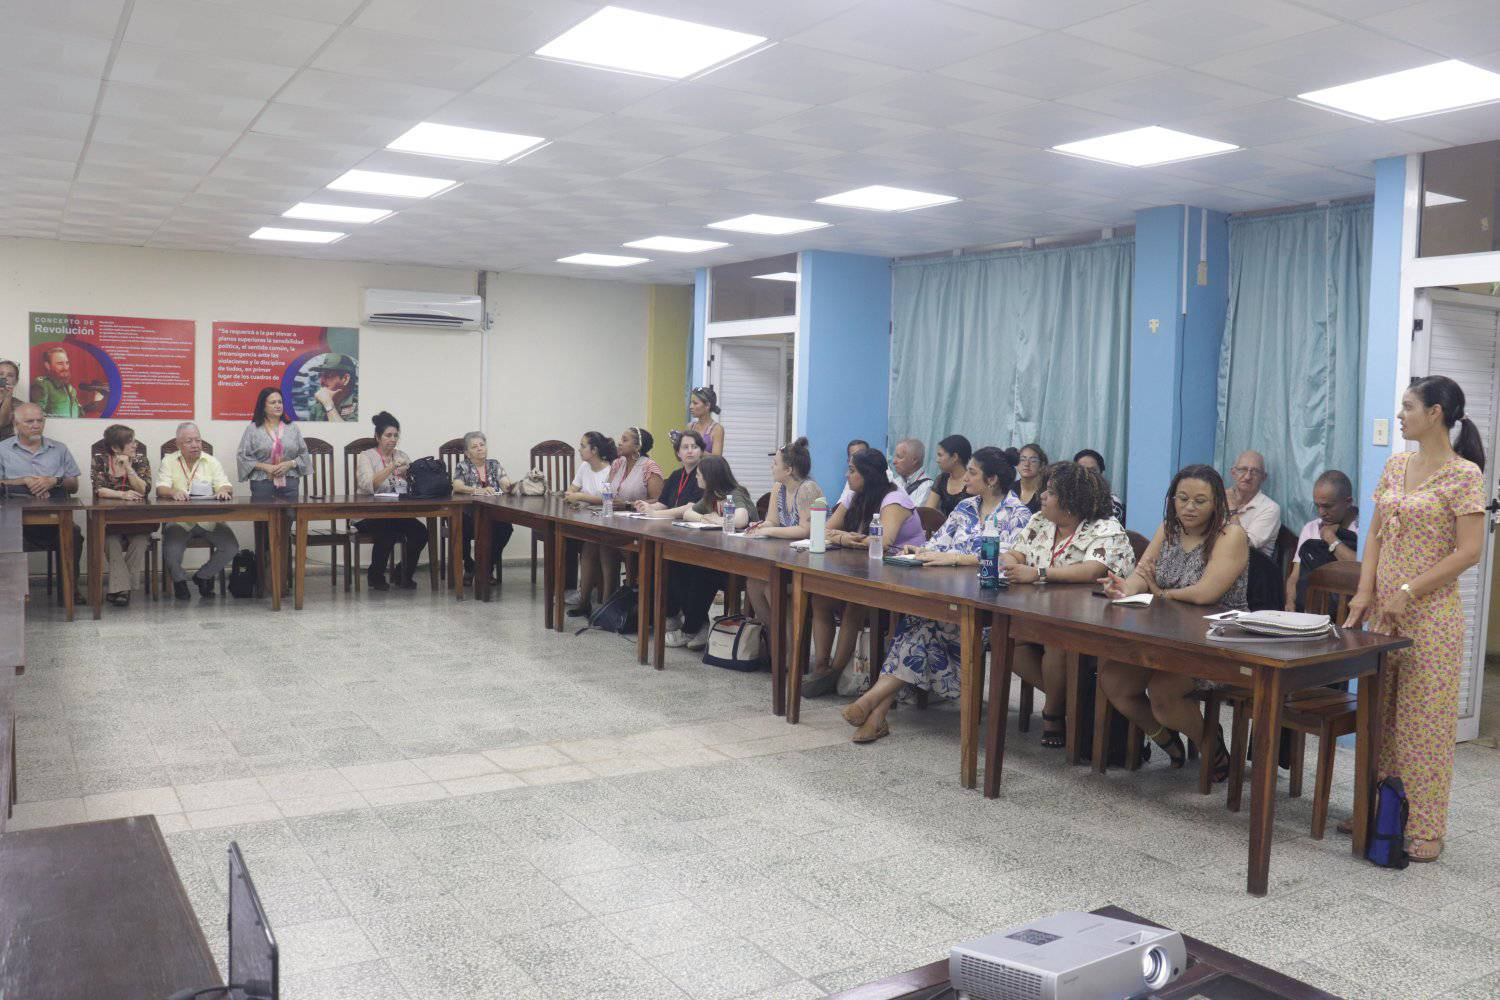  Teachers from Cuba and the United States strengthen alliances in Camagüey